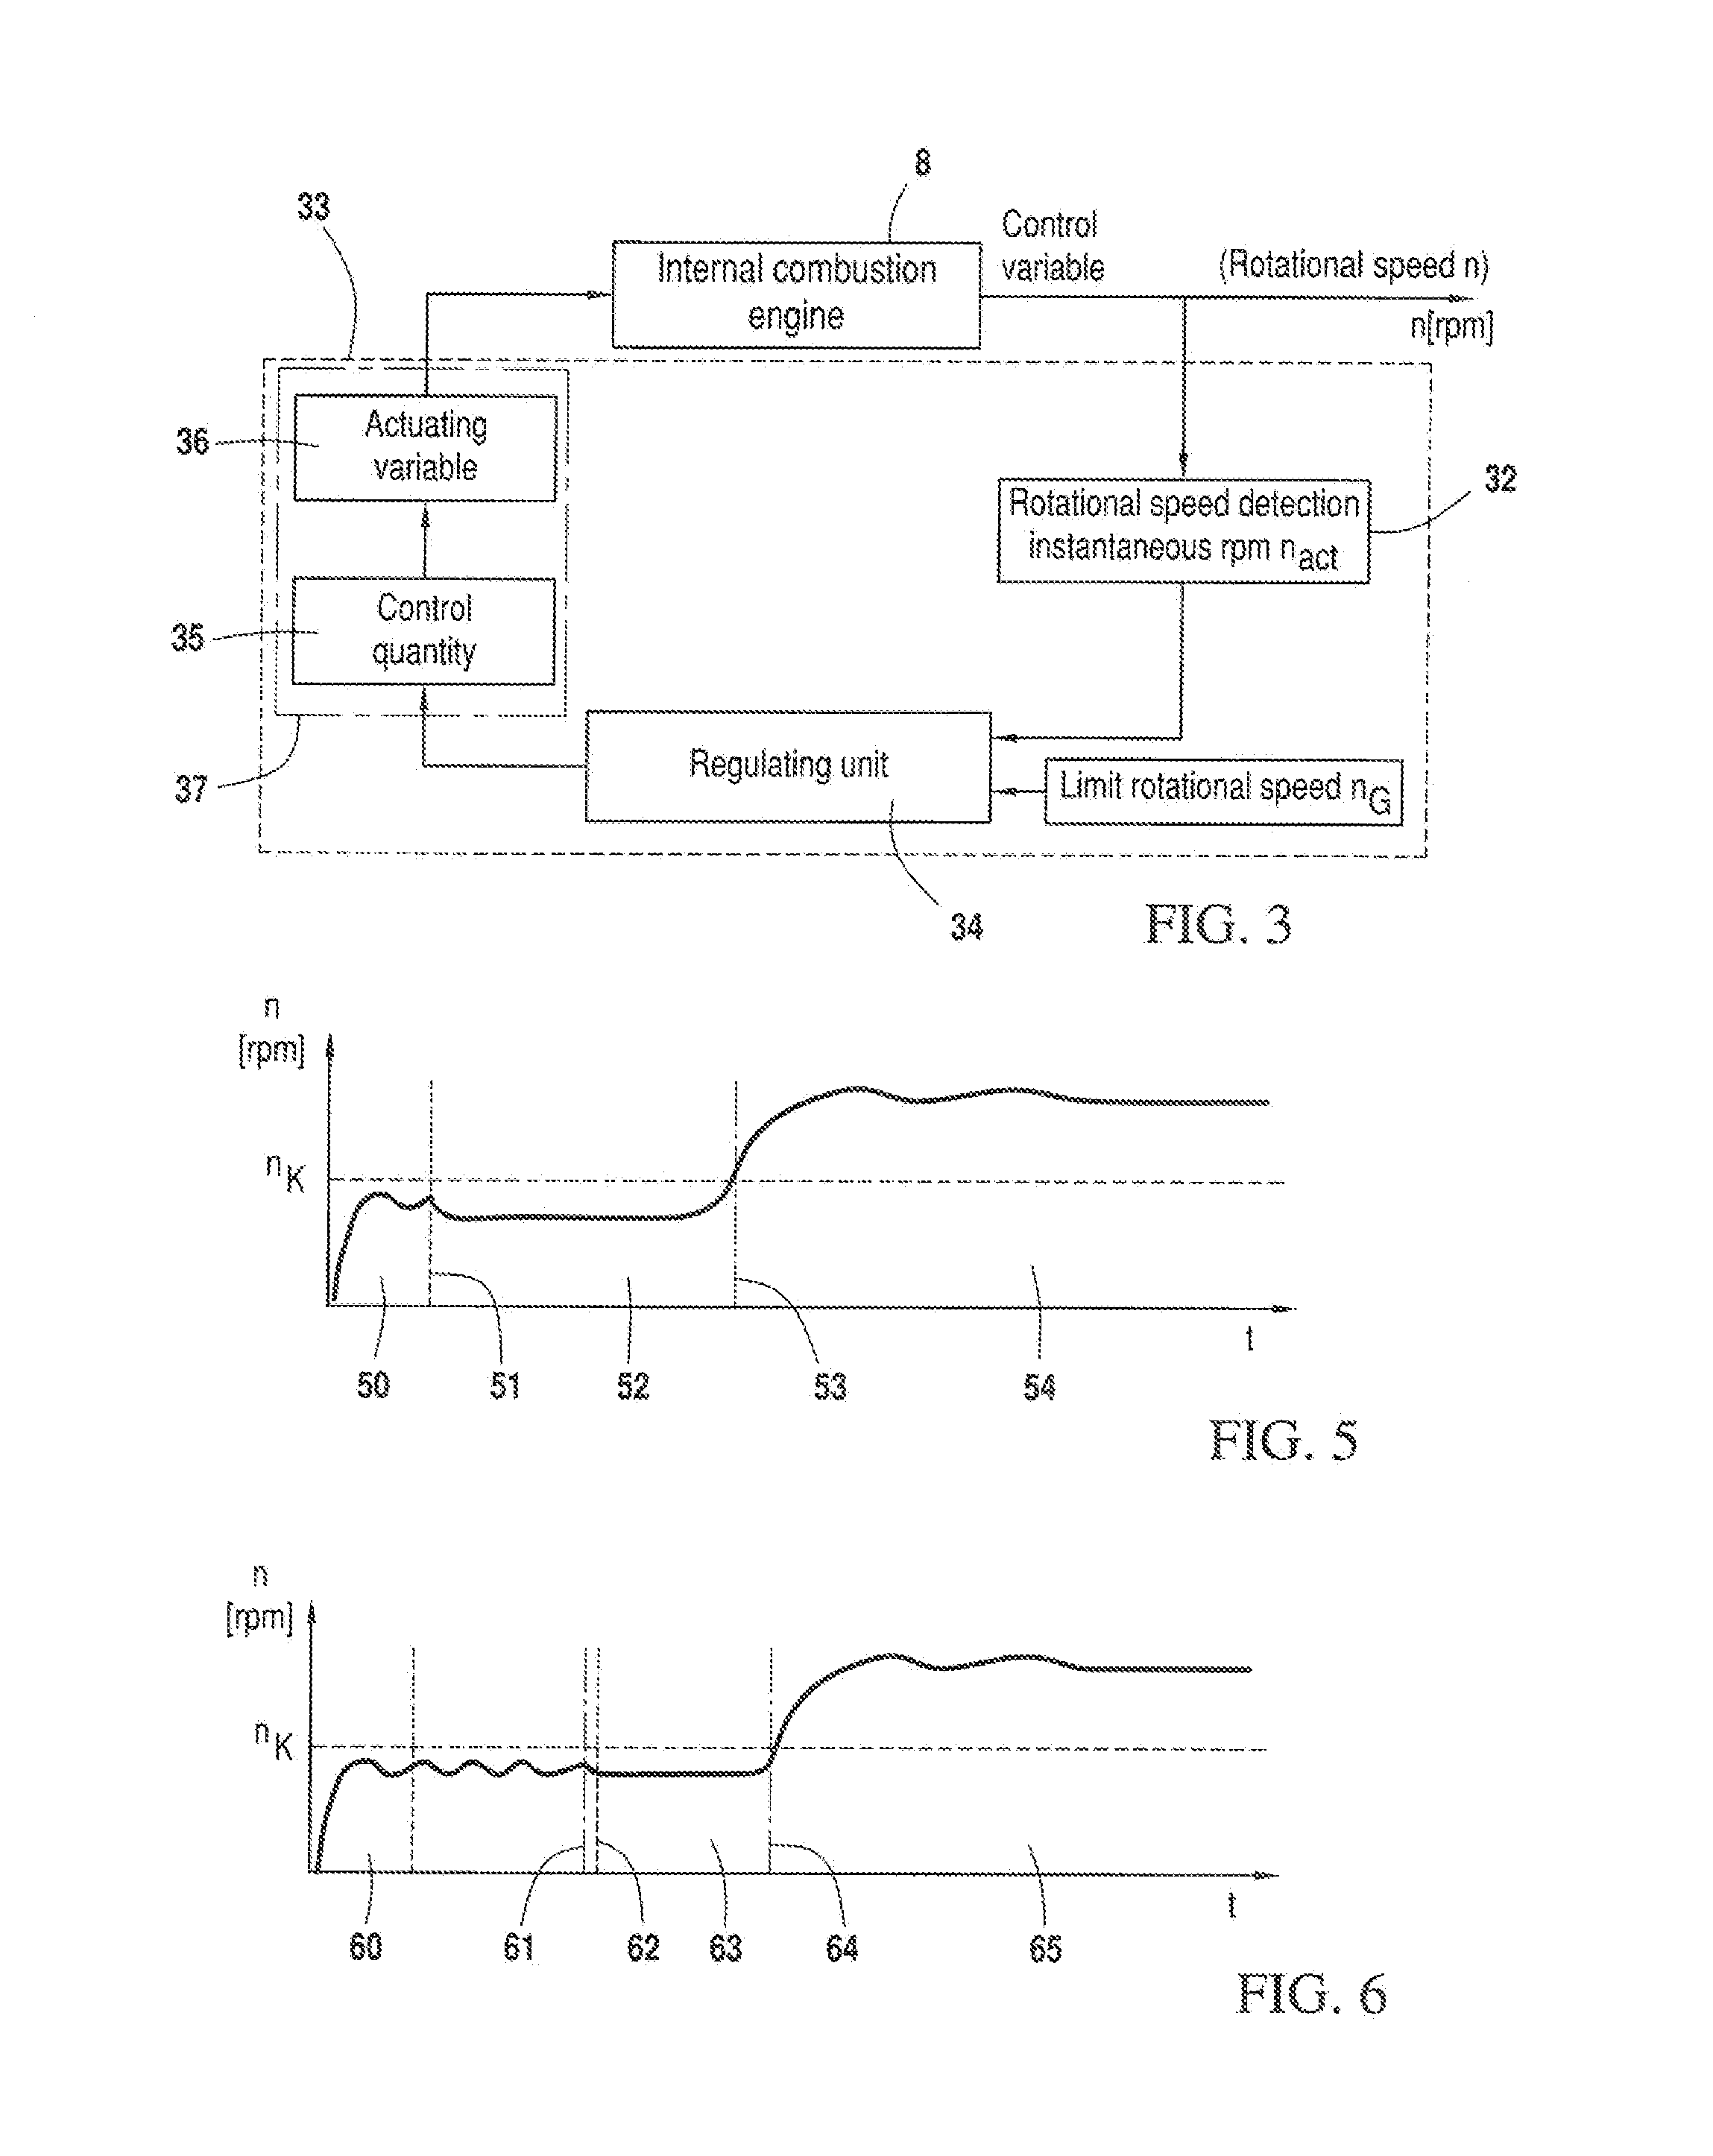 Method for switching off a rotational speed limit in an internal combustion engine